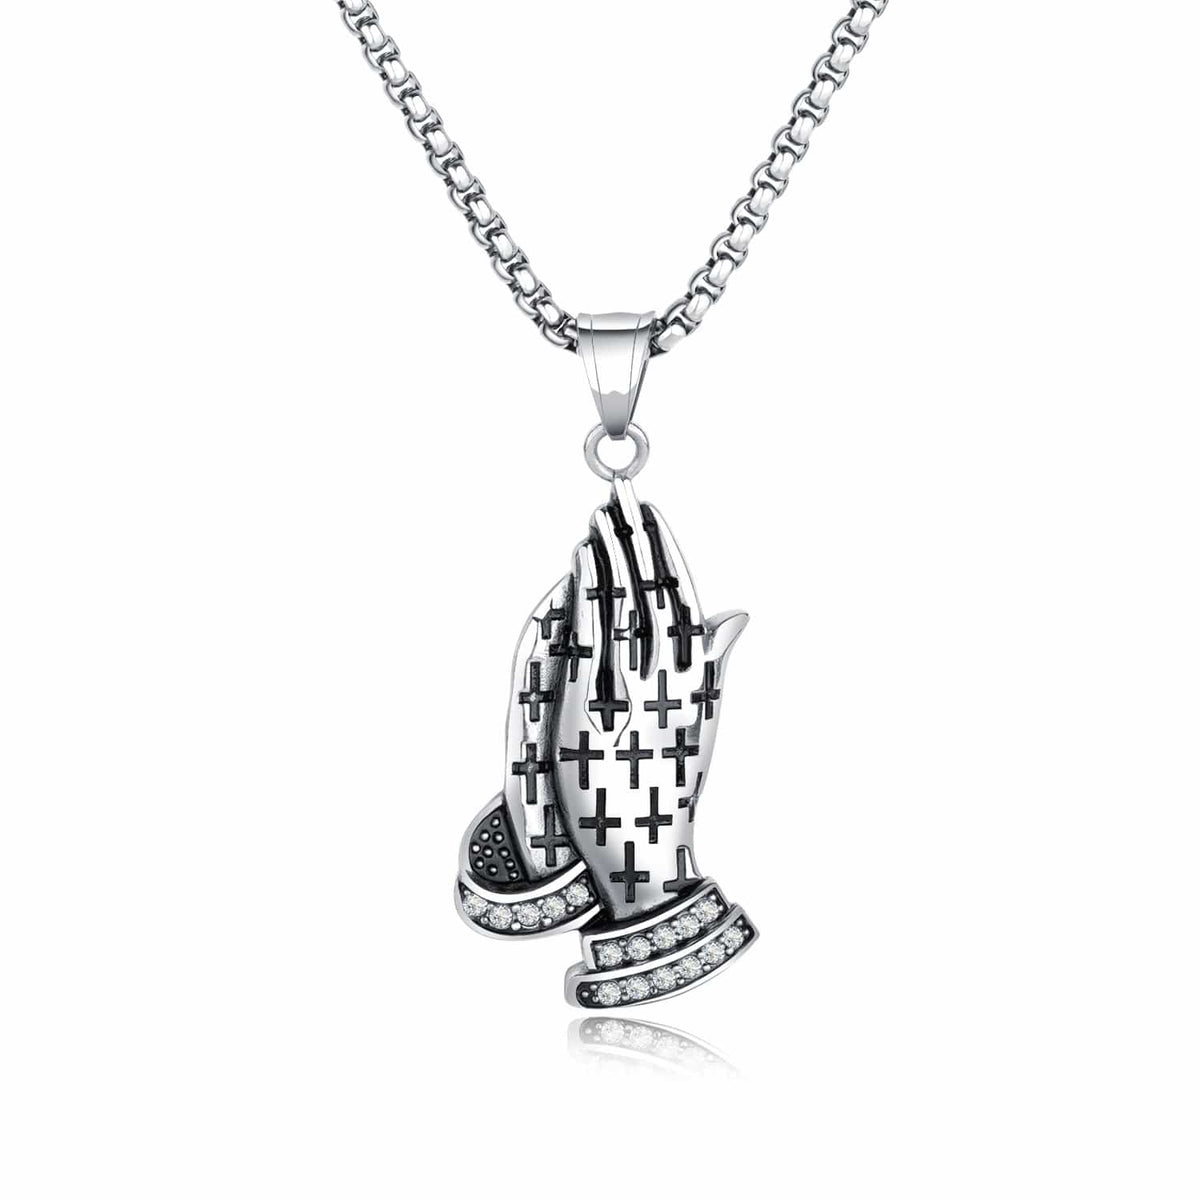 Stainless Steel Praying Hands Necklace